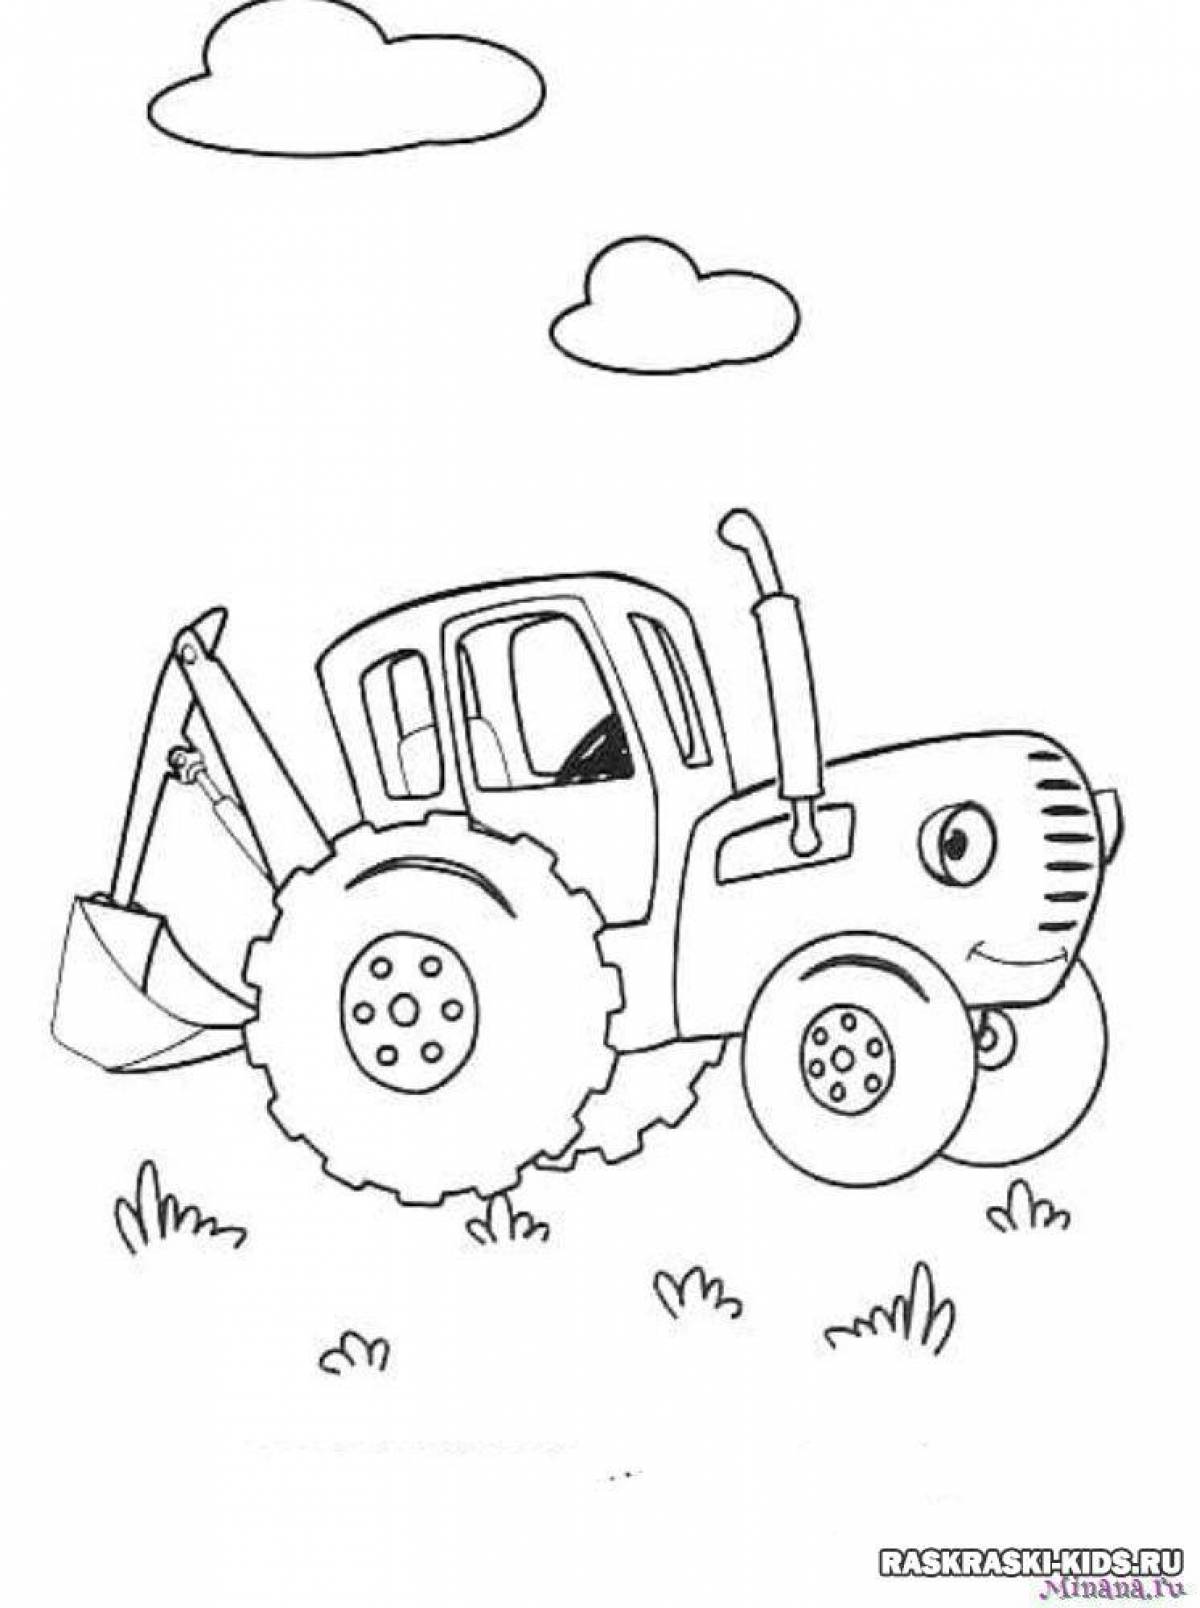 Cute blue tractor coloring book